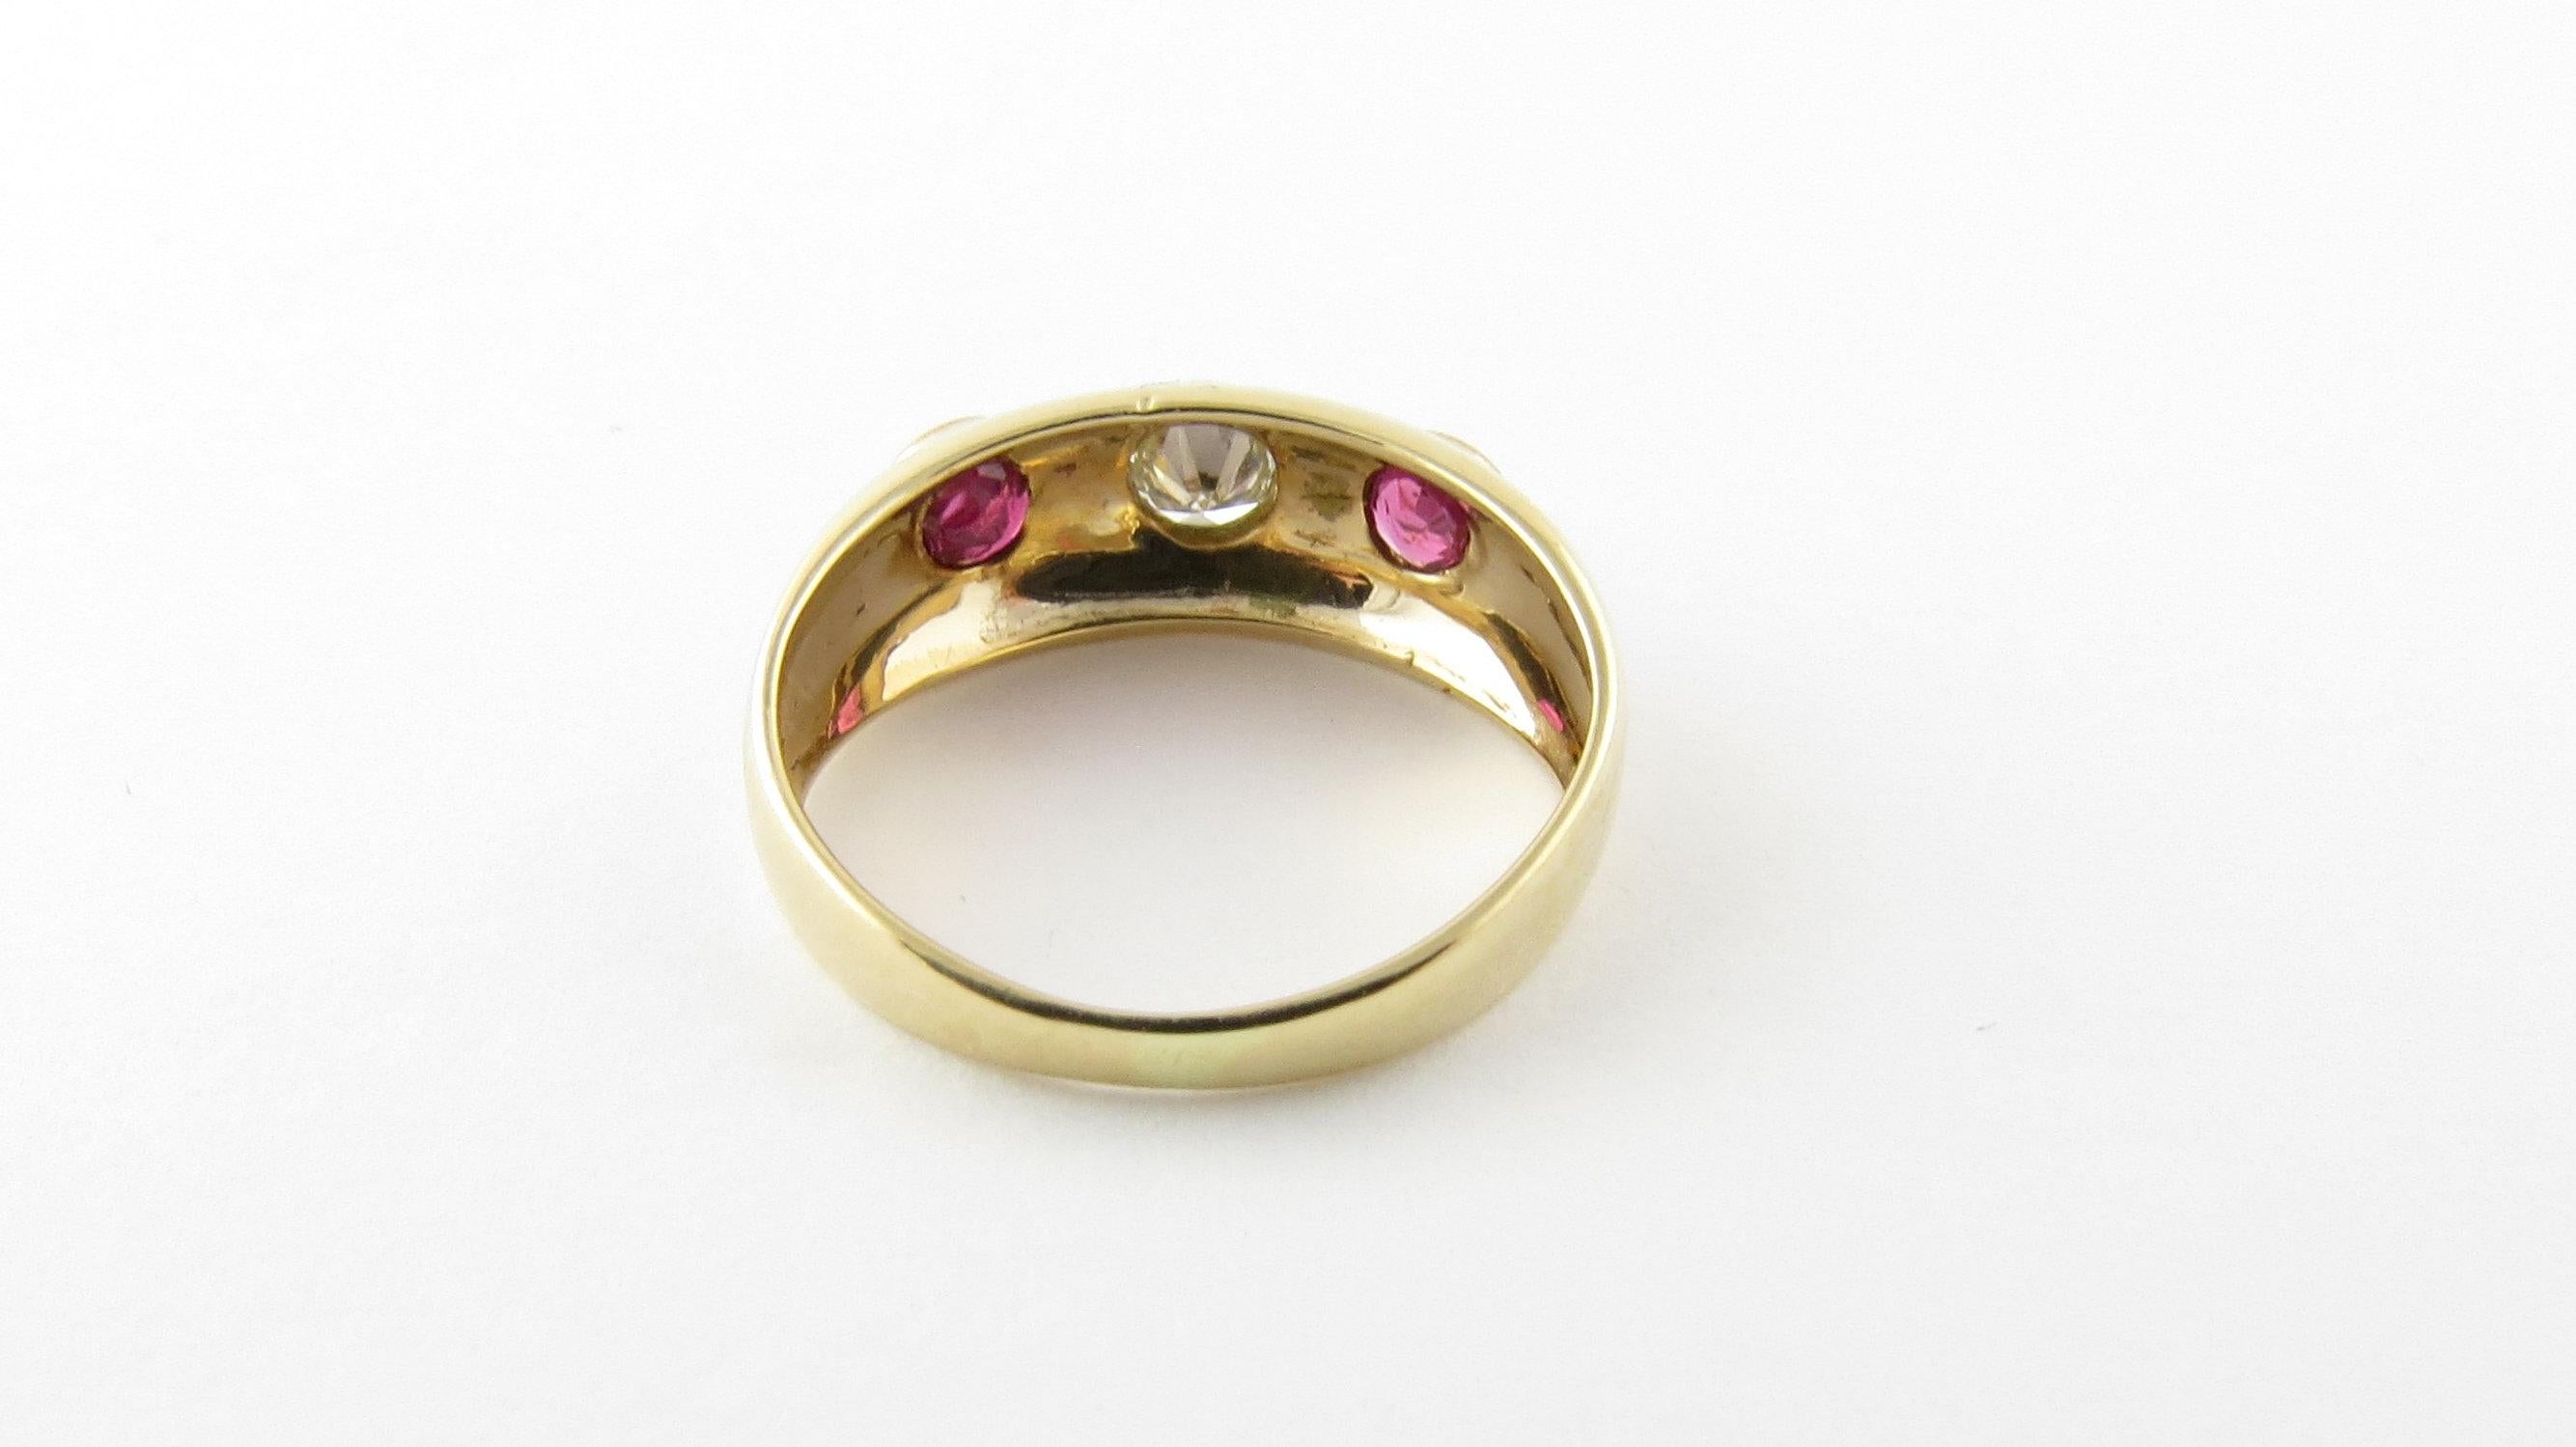 Vintage 14 Karat Yellow Gold Ruby and Diamond Ring Size 3- This lovely ring features two round rubies and one round brilliant cut diamond set in polished 14K yellow gold. Width: 6 mm. Shank: 2 mm. Approximate total diamond weight: .07 ct. Diamond